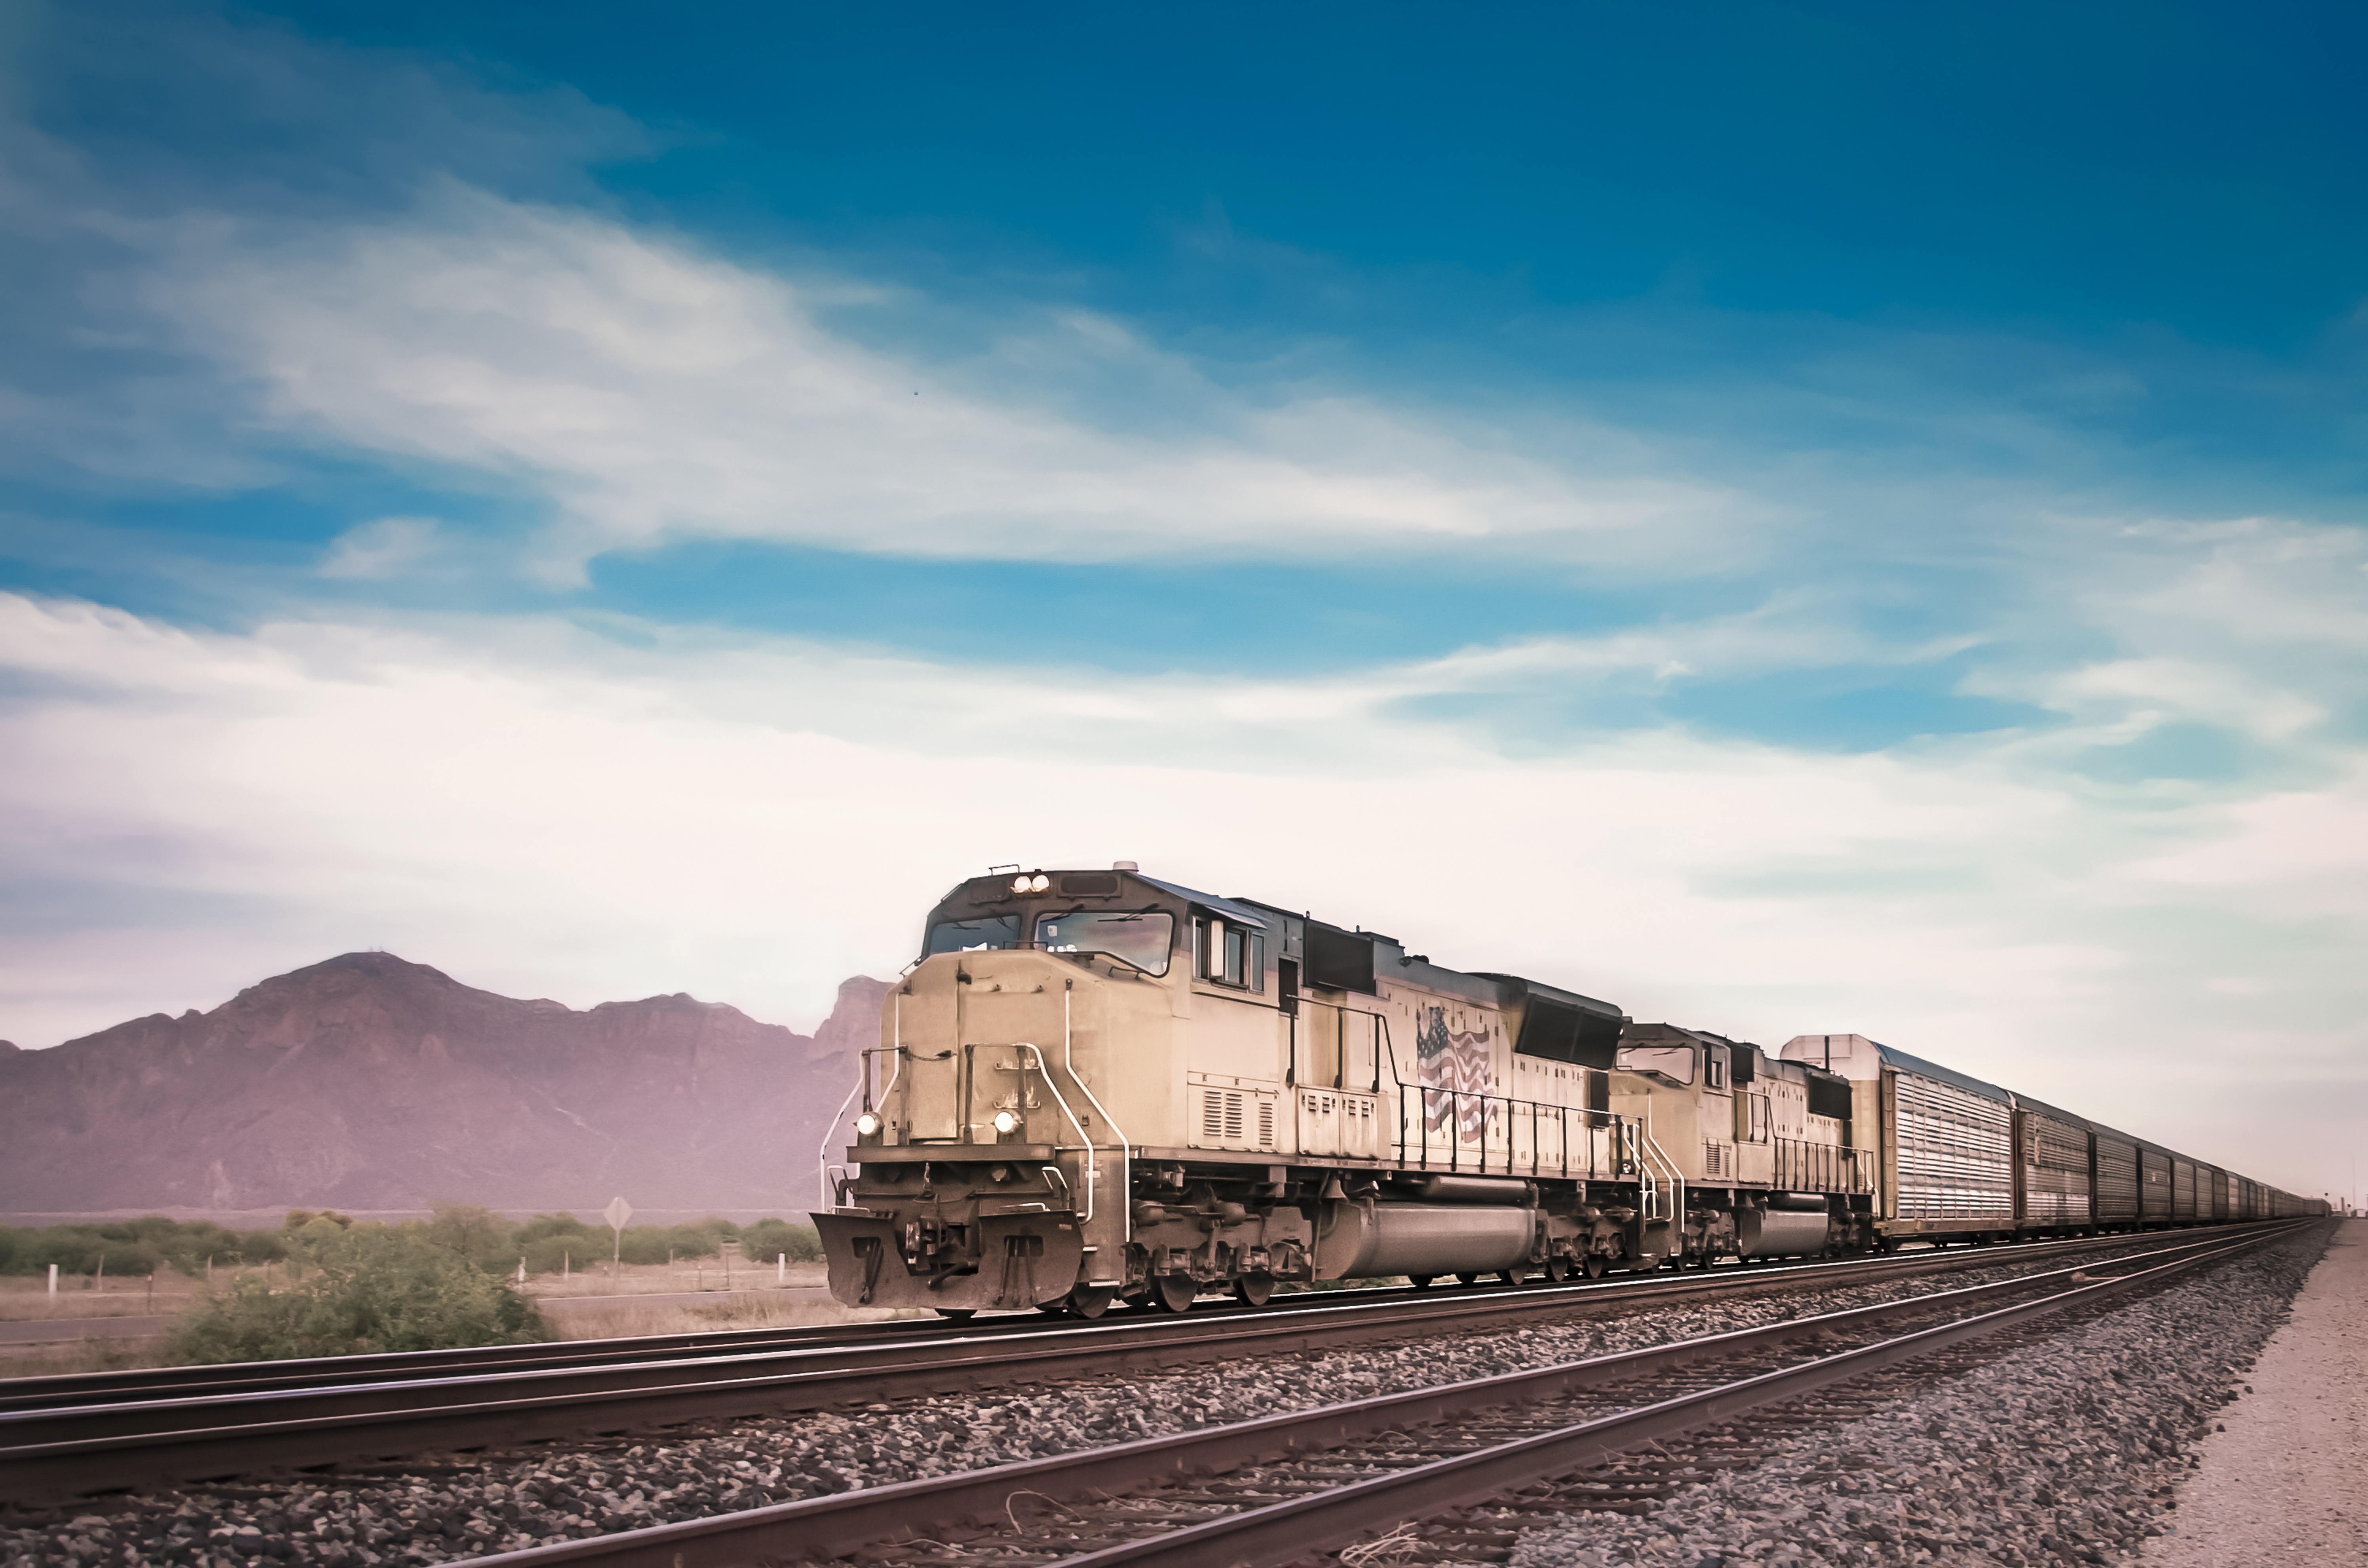 Latest AAR Trade Report Emphasizes Rail’s Role in International Trade